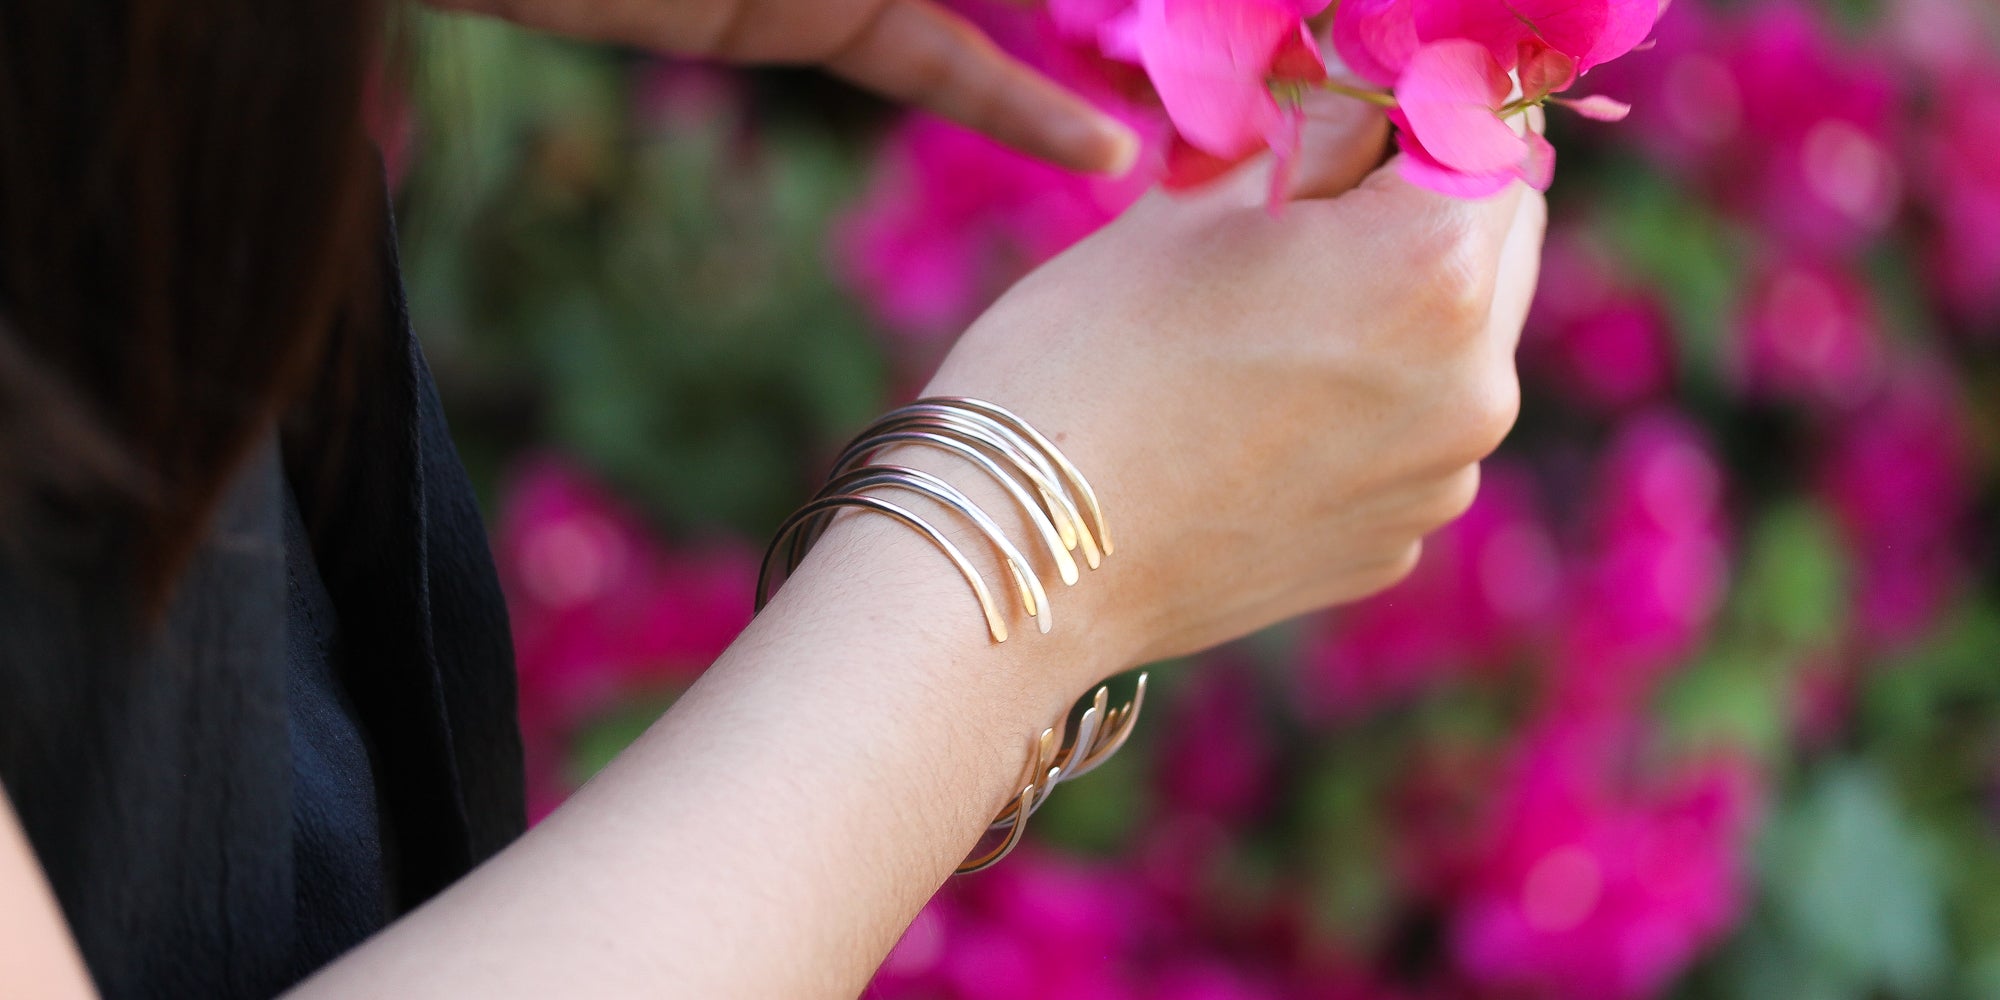 What is eco-friendly jewelry?